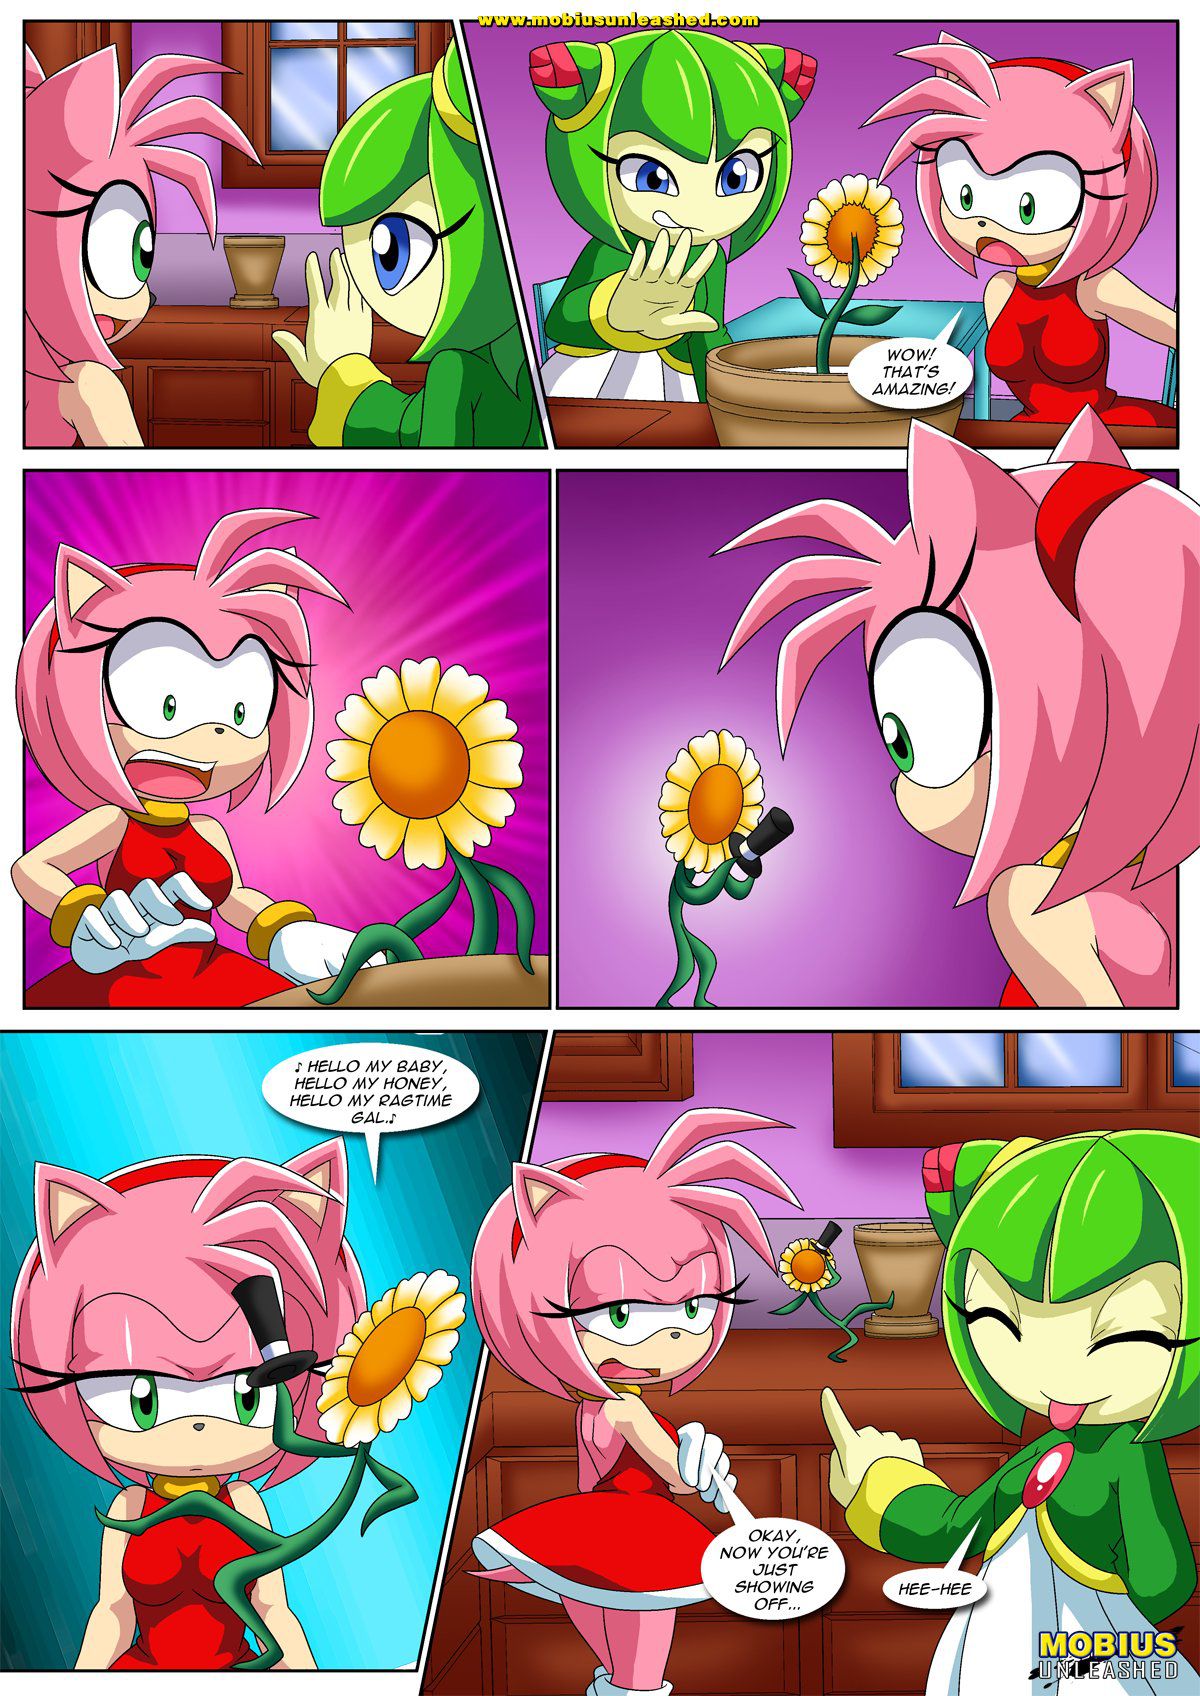 [Palcomix] Team GF's Tentacled Tale (Sonic The Hedgehog) [Ongoing] 5